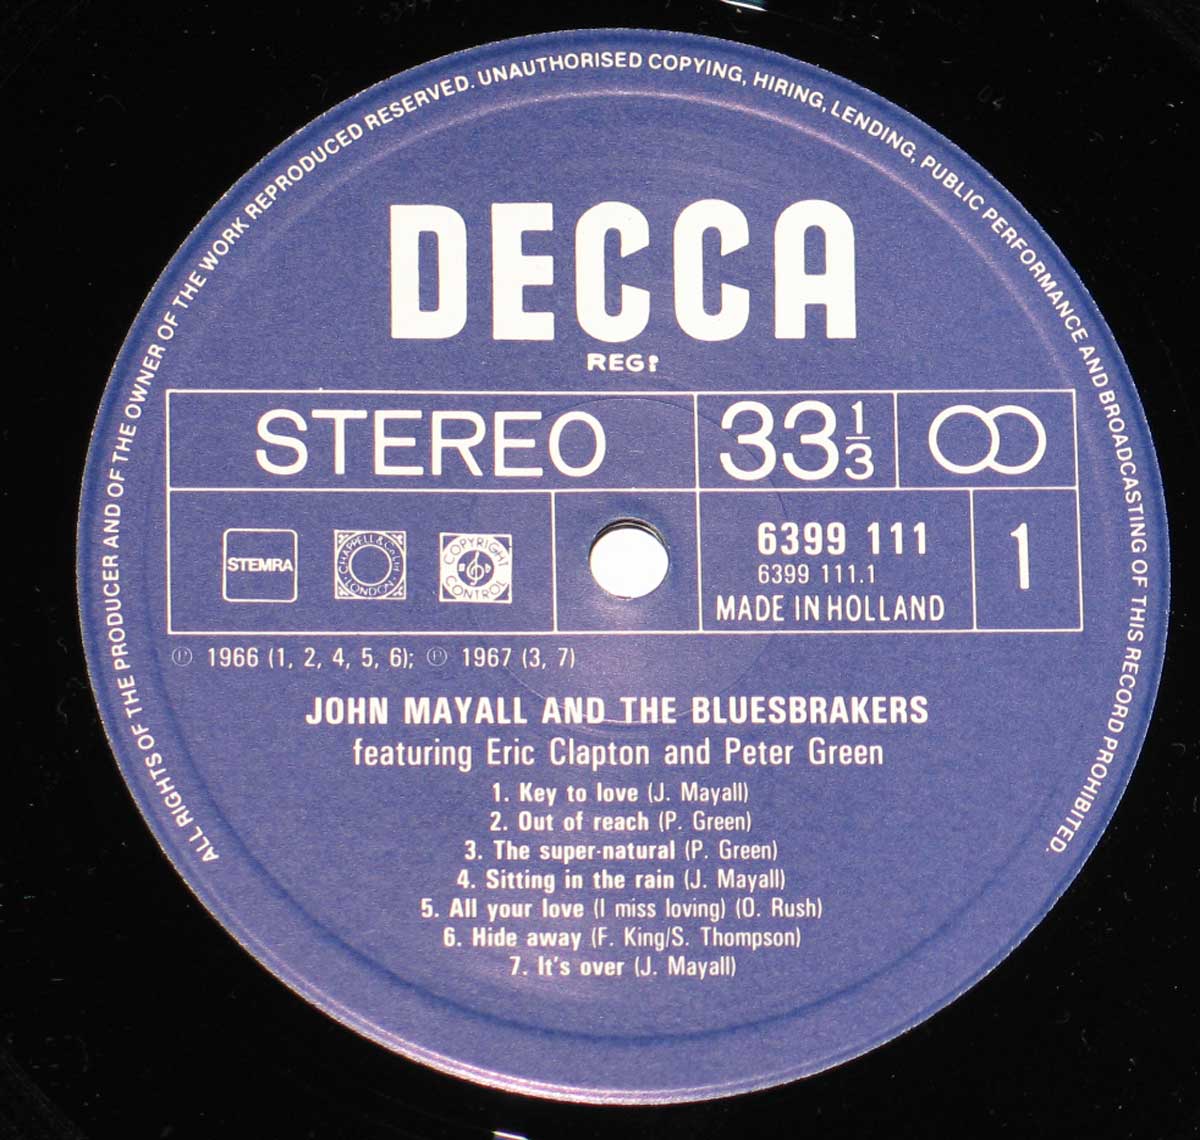 Photo of record label of John Mayall & The Bluesbreakers Featuring Eric Clapton & Peter Green 